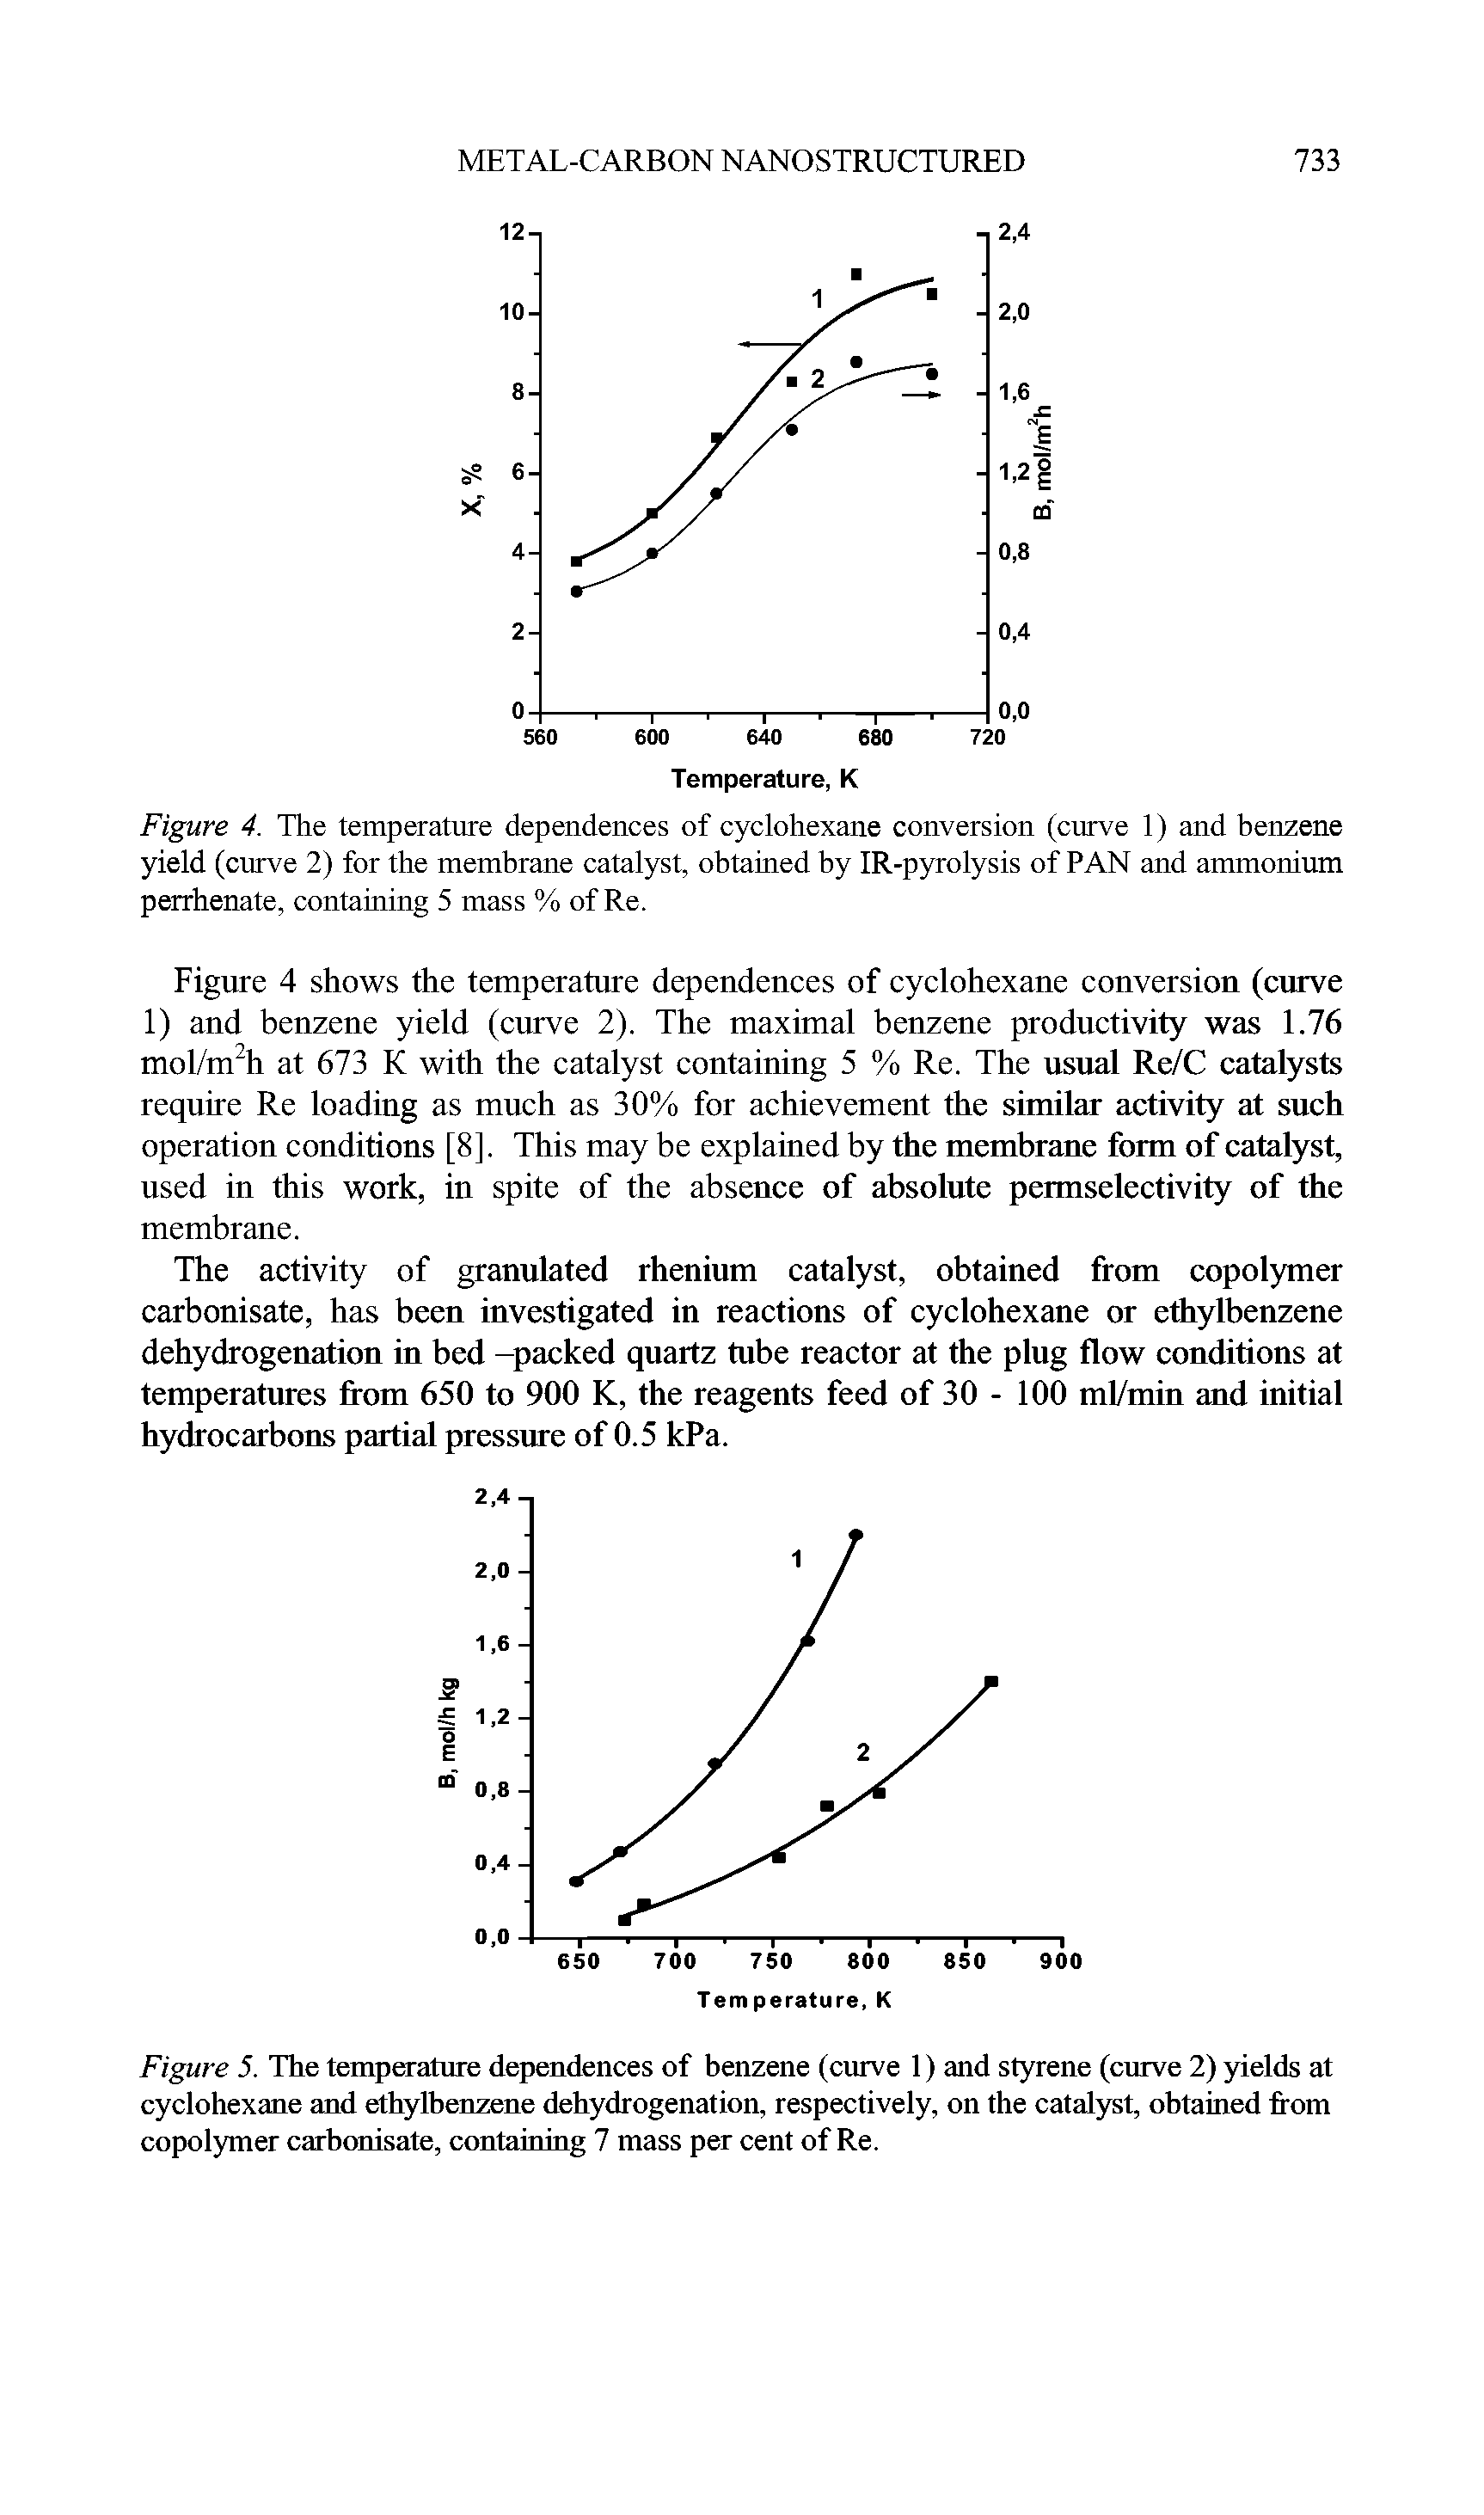 Figure 4. The temperature dependences of cyclohexane conversion (curve 1) and benzene yield (curve 2) for the membrane catalyst, obtained by IR-pyrolysis of PAN and ammonium perrhenate, containing 5 mass % of Re.